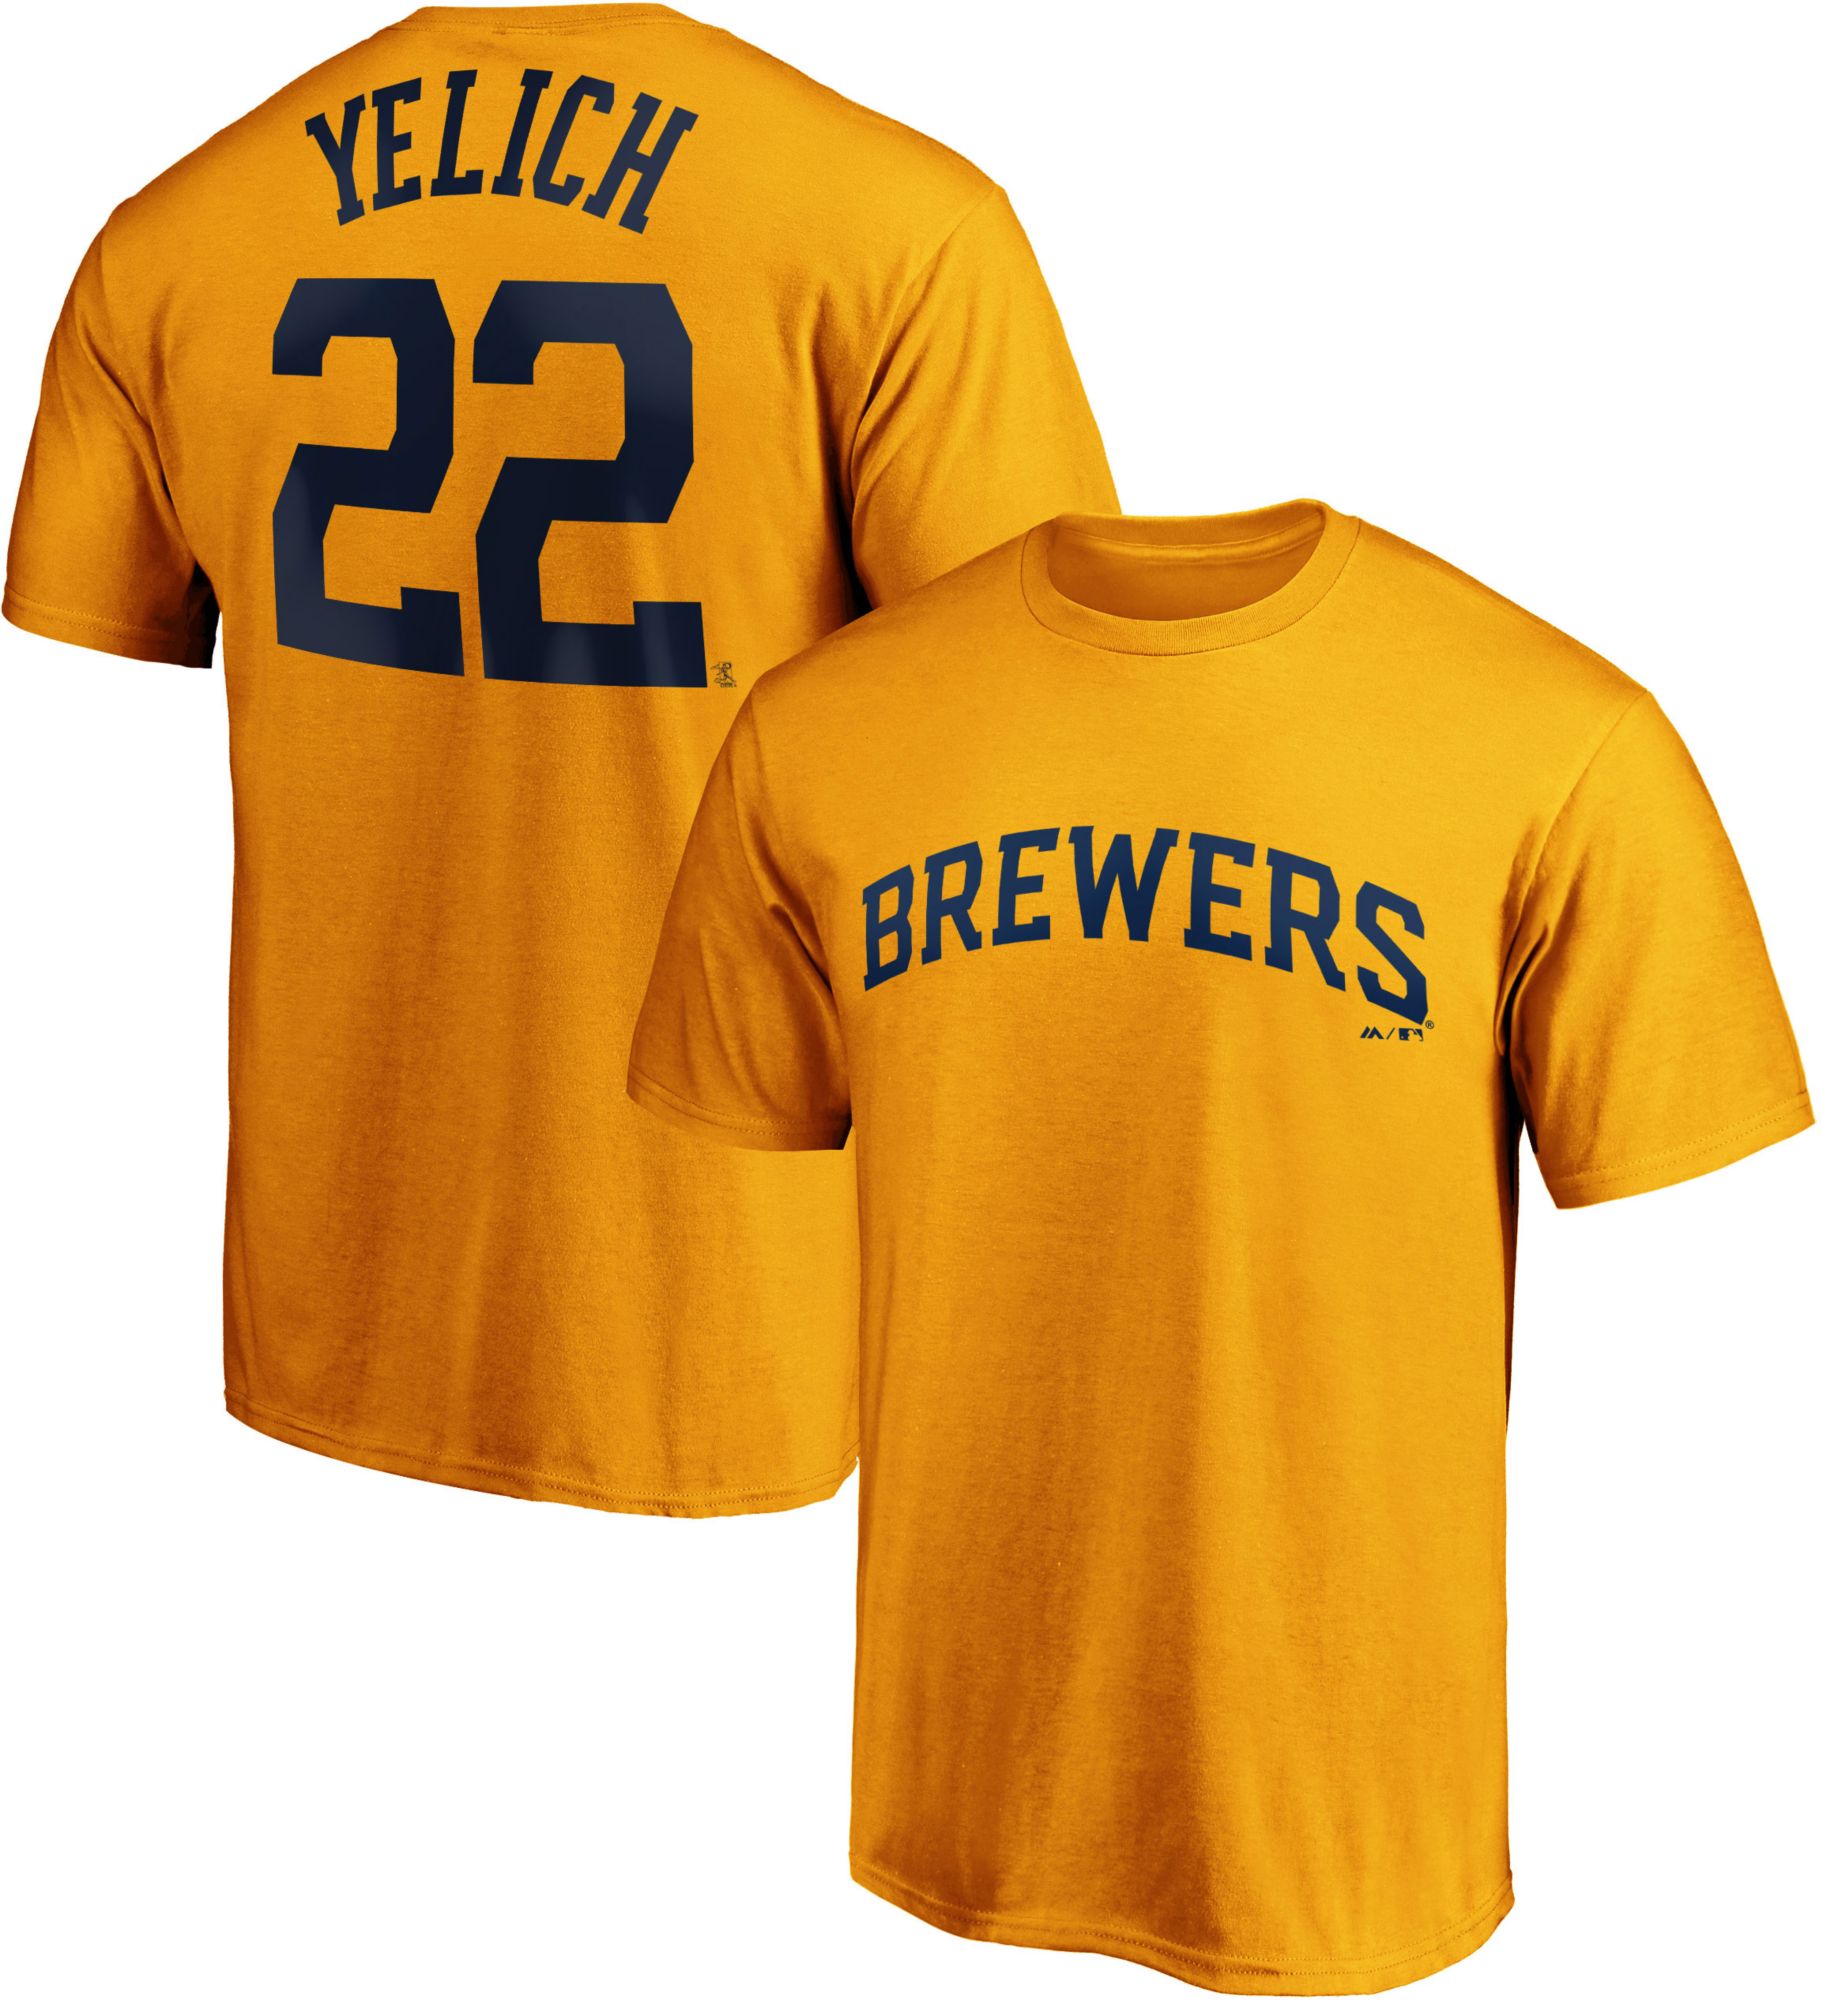 brewers gold jersey